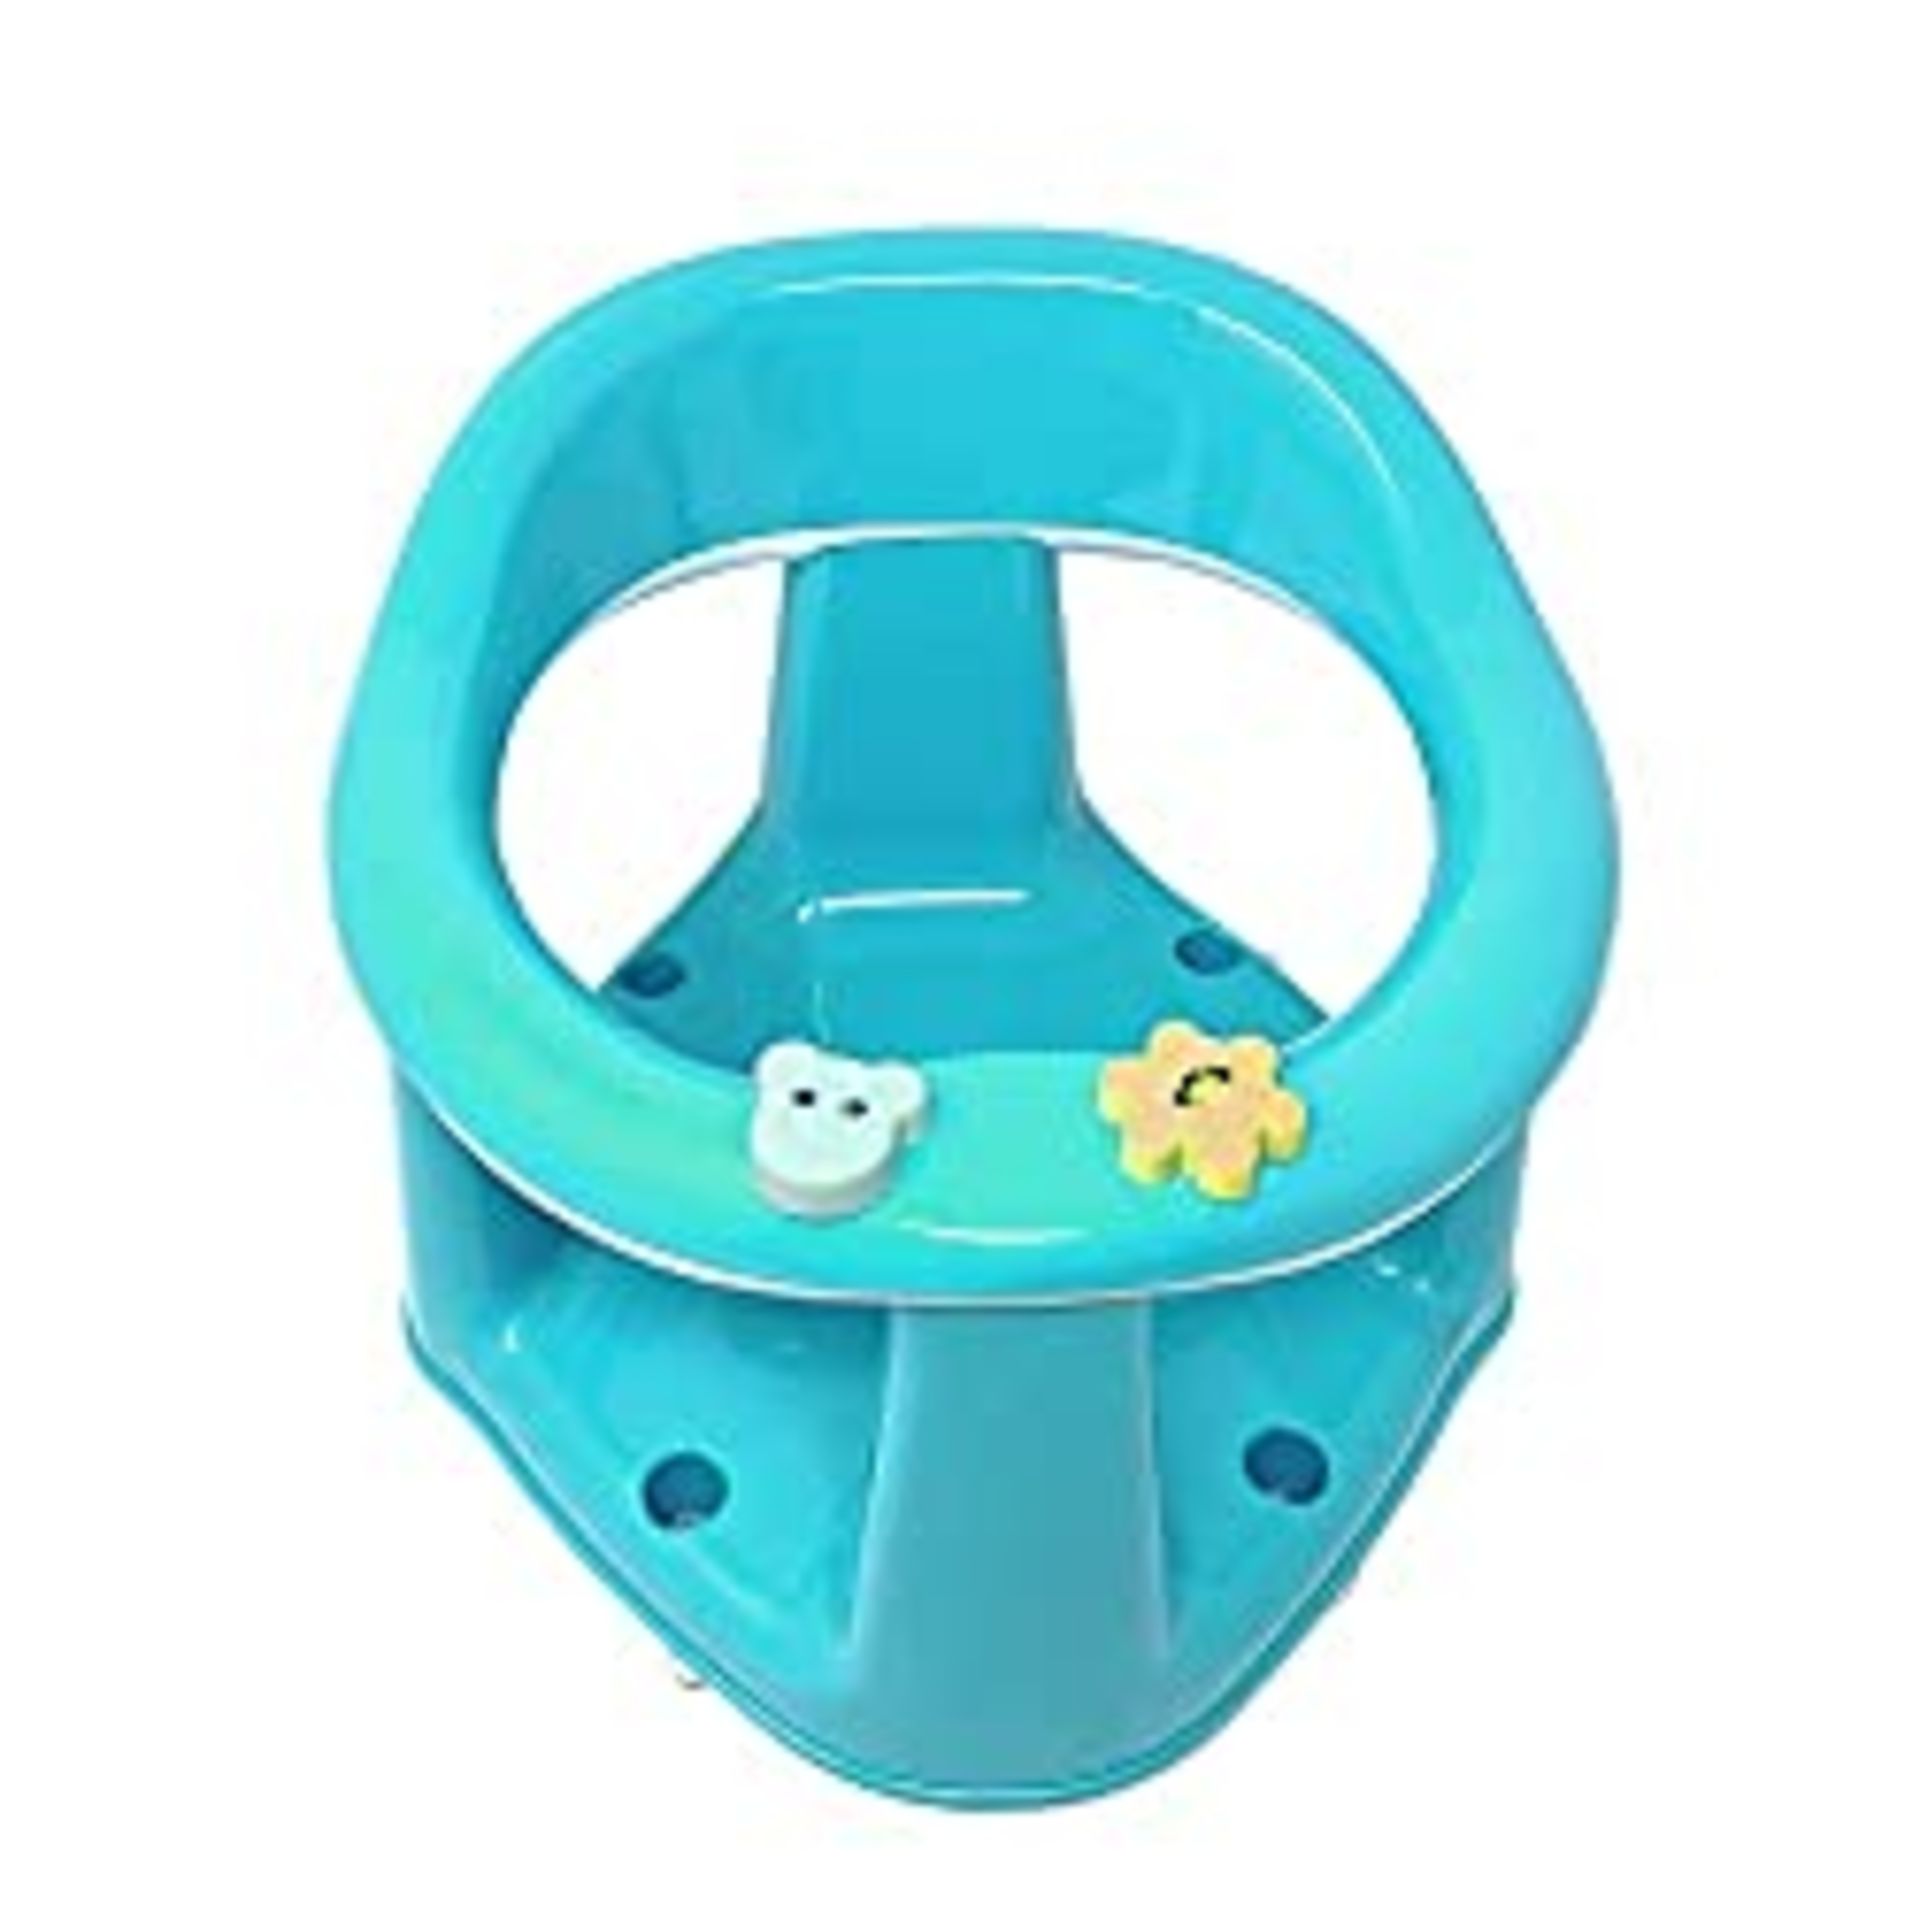 RRP £19.99 3 in 1 Ergonomic Shaped Baby Infant Toddler Child Bath - Image 2 of 3